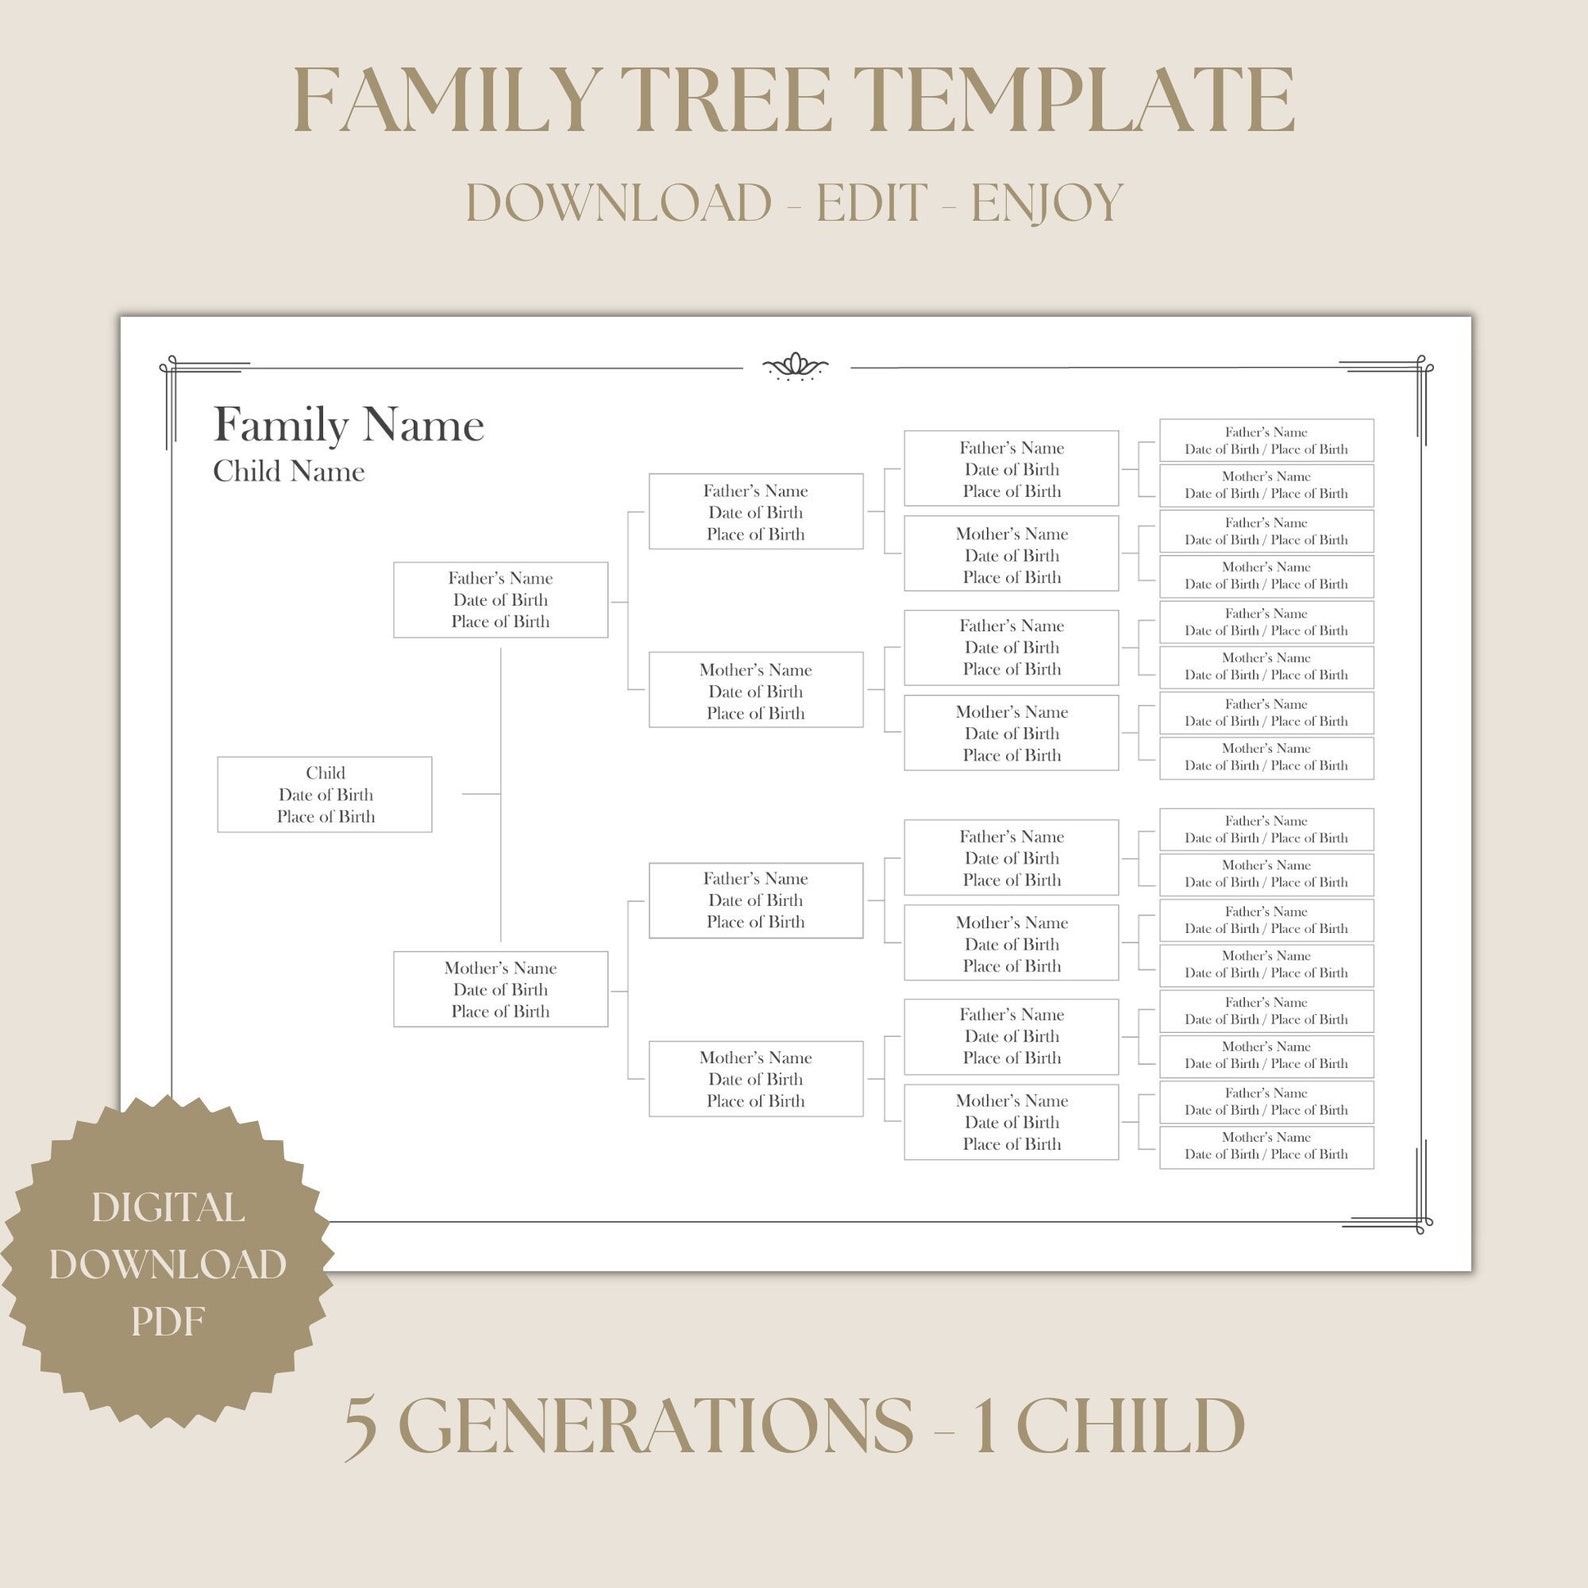 Family Tree for 5 Generations, Printable Family Tree Template, Editable ...